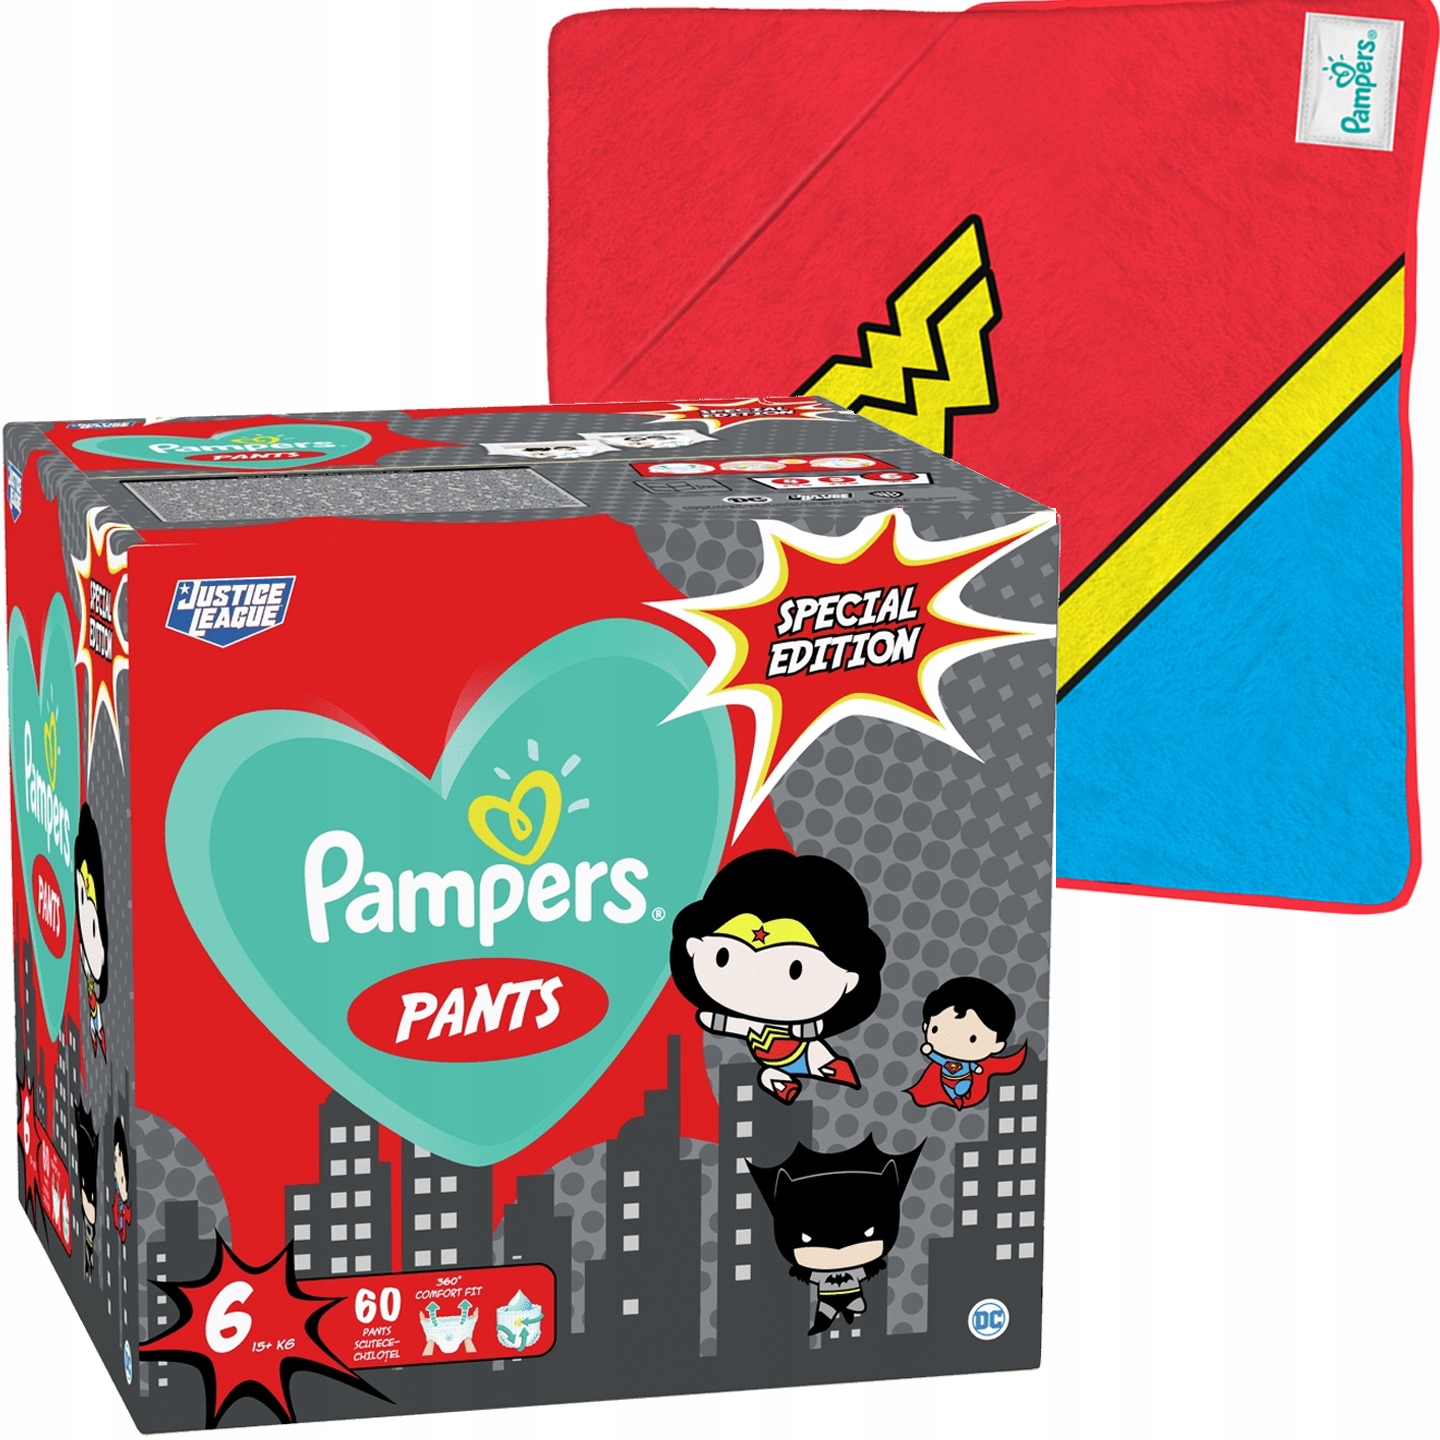 pieluchomajtki pampers carry pack